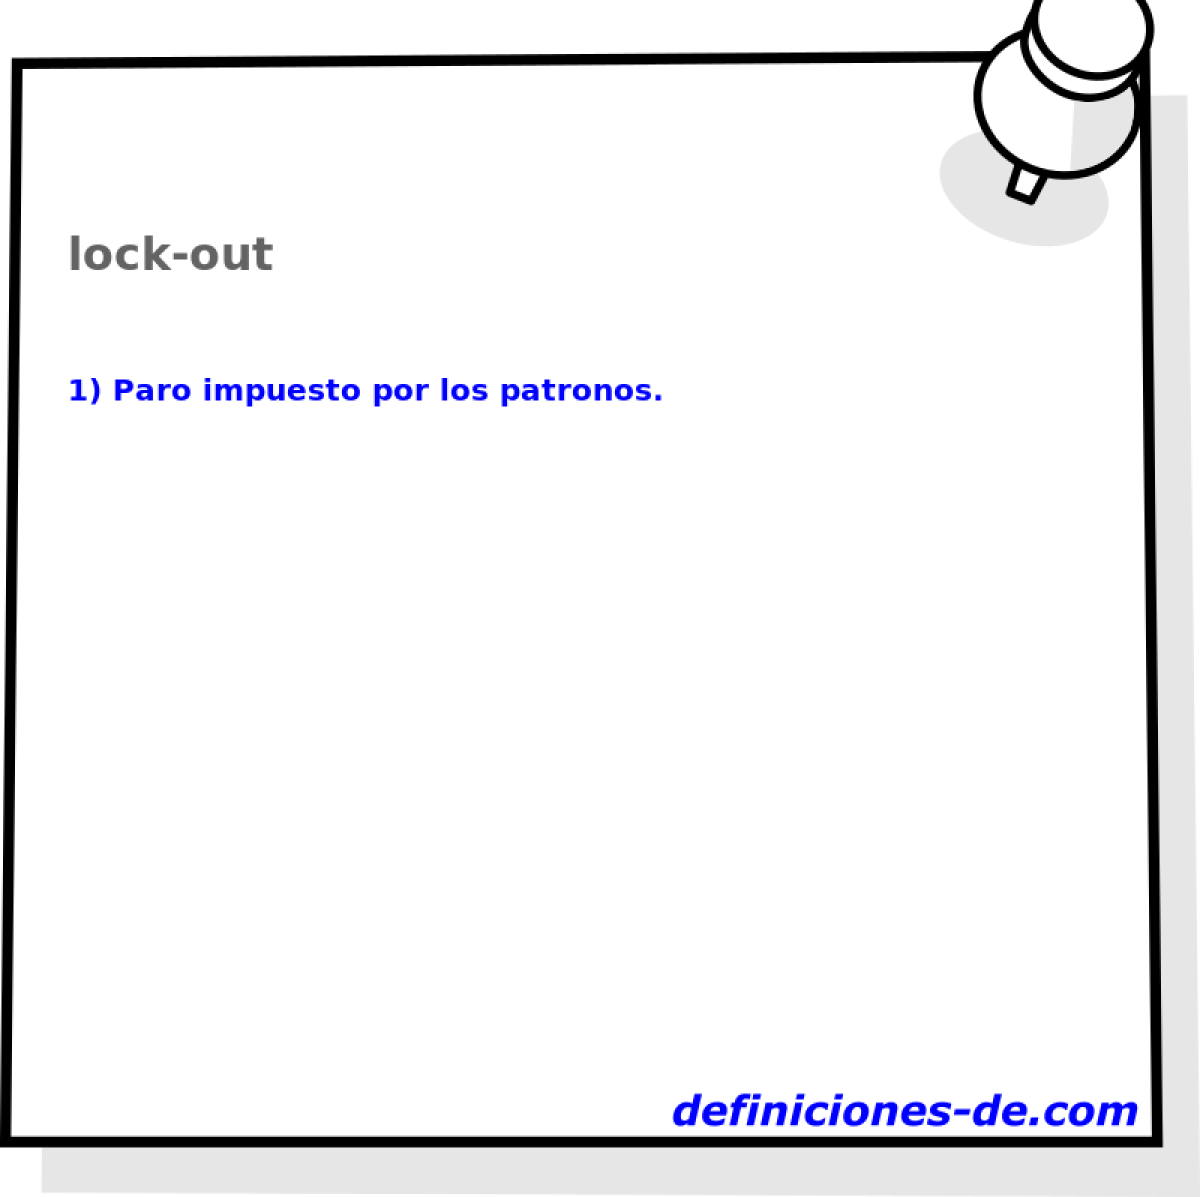 lock-out 